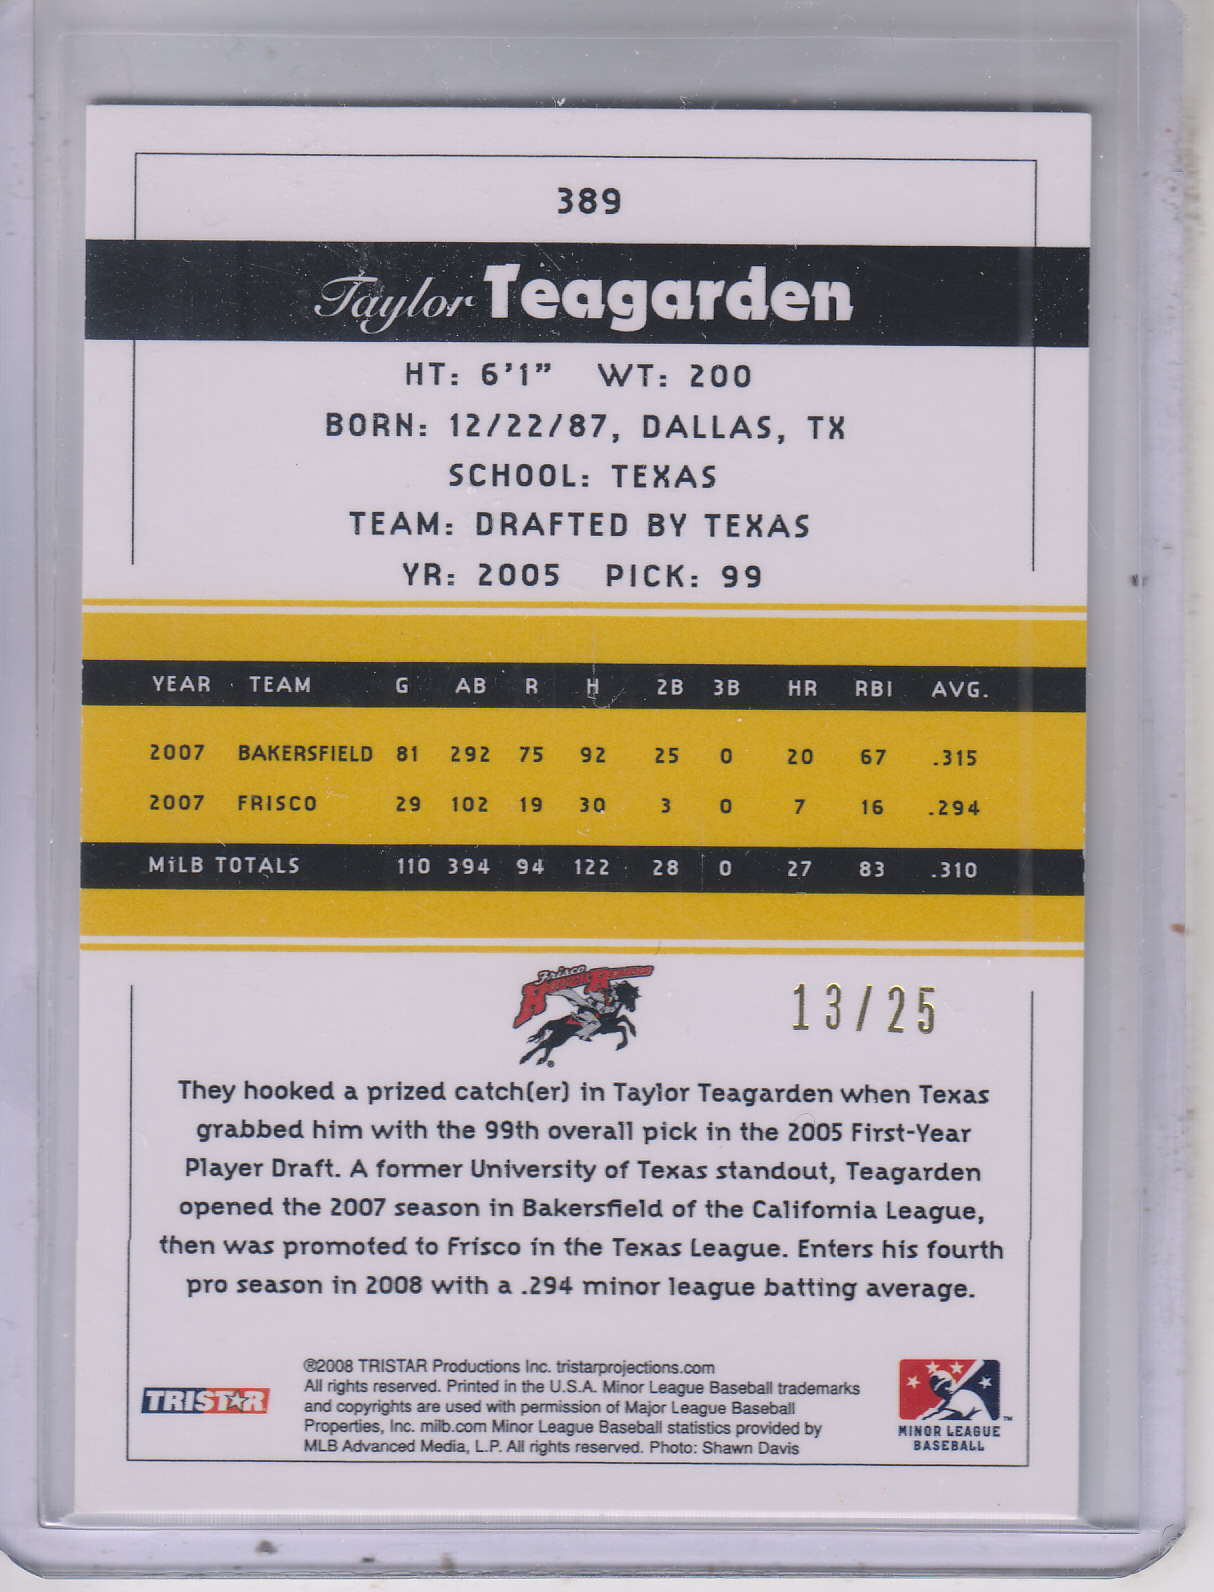 2008 TRISTAR PROjections Yellow #389 Taylor Teagarden back image